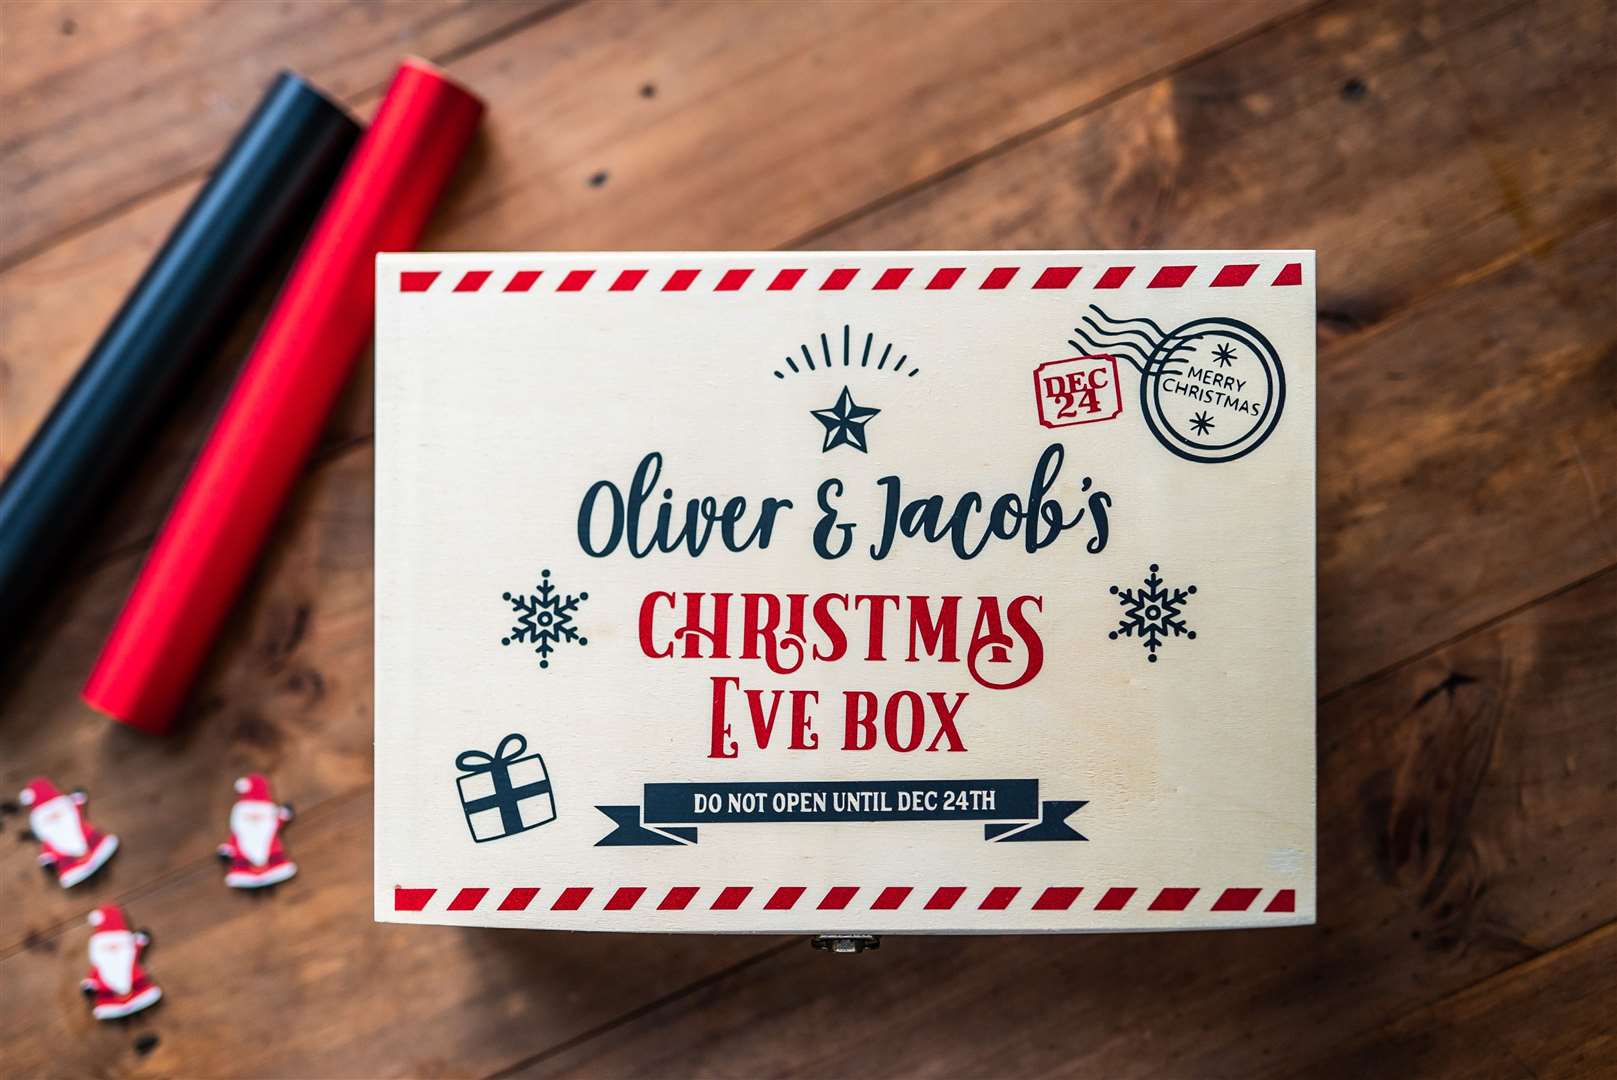 The Works has an entire range of items to help parents personalise and craft their own special box